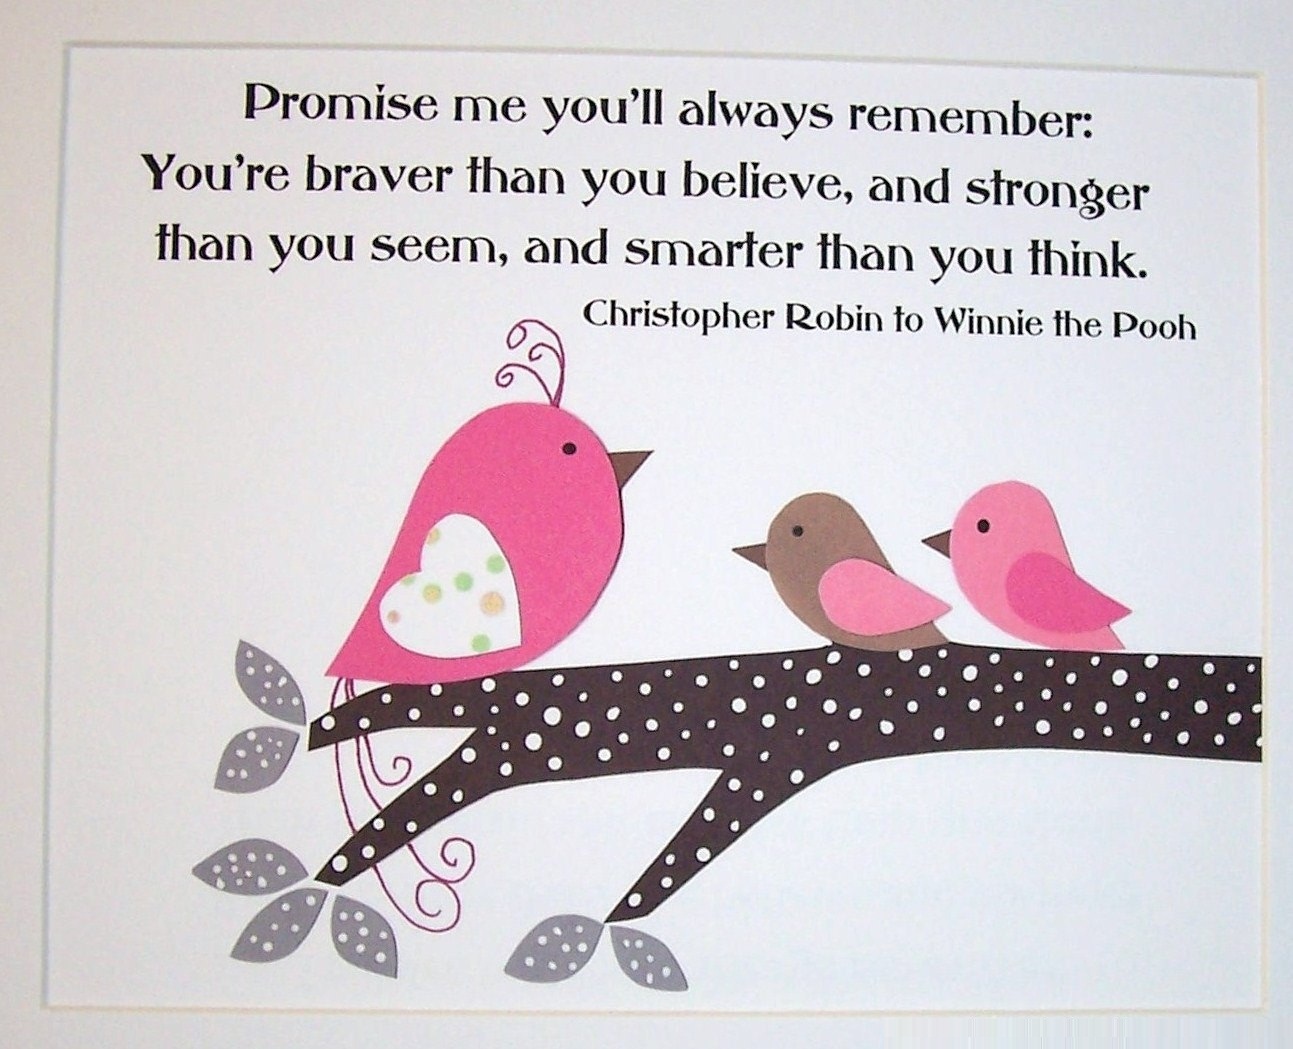 Happy Promise Day Quotes and Wallpaper 2015